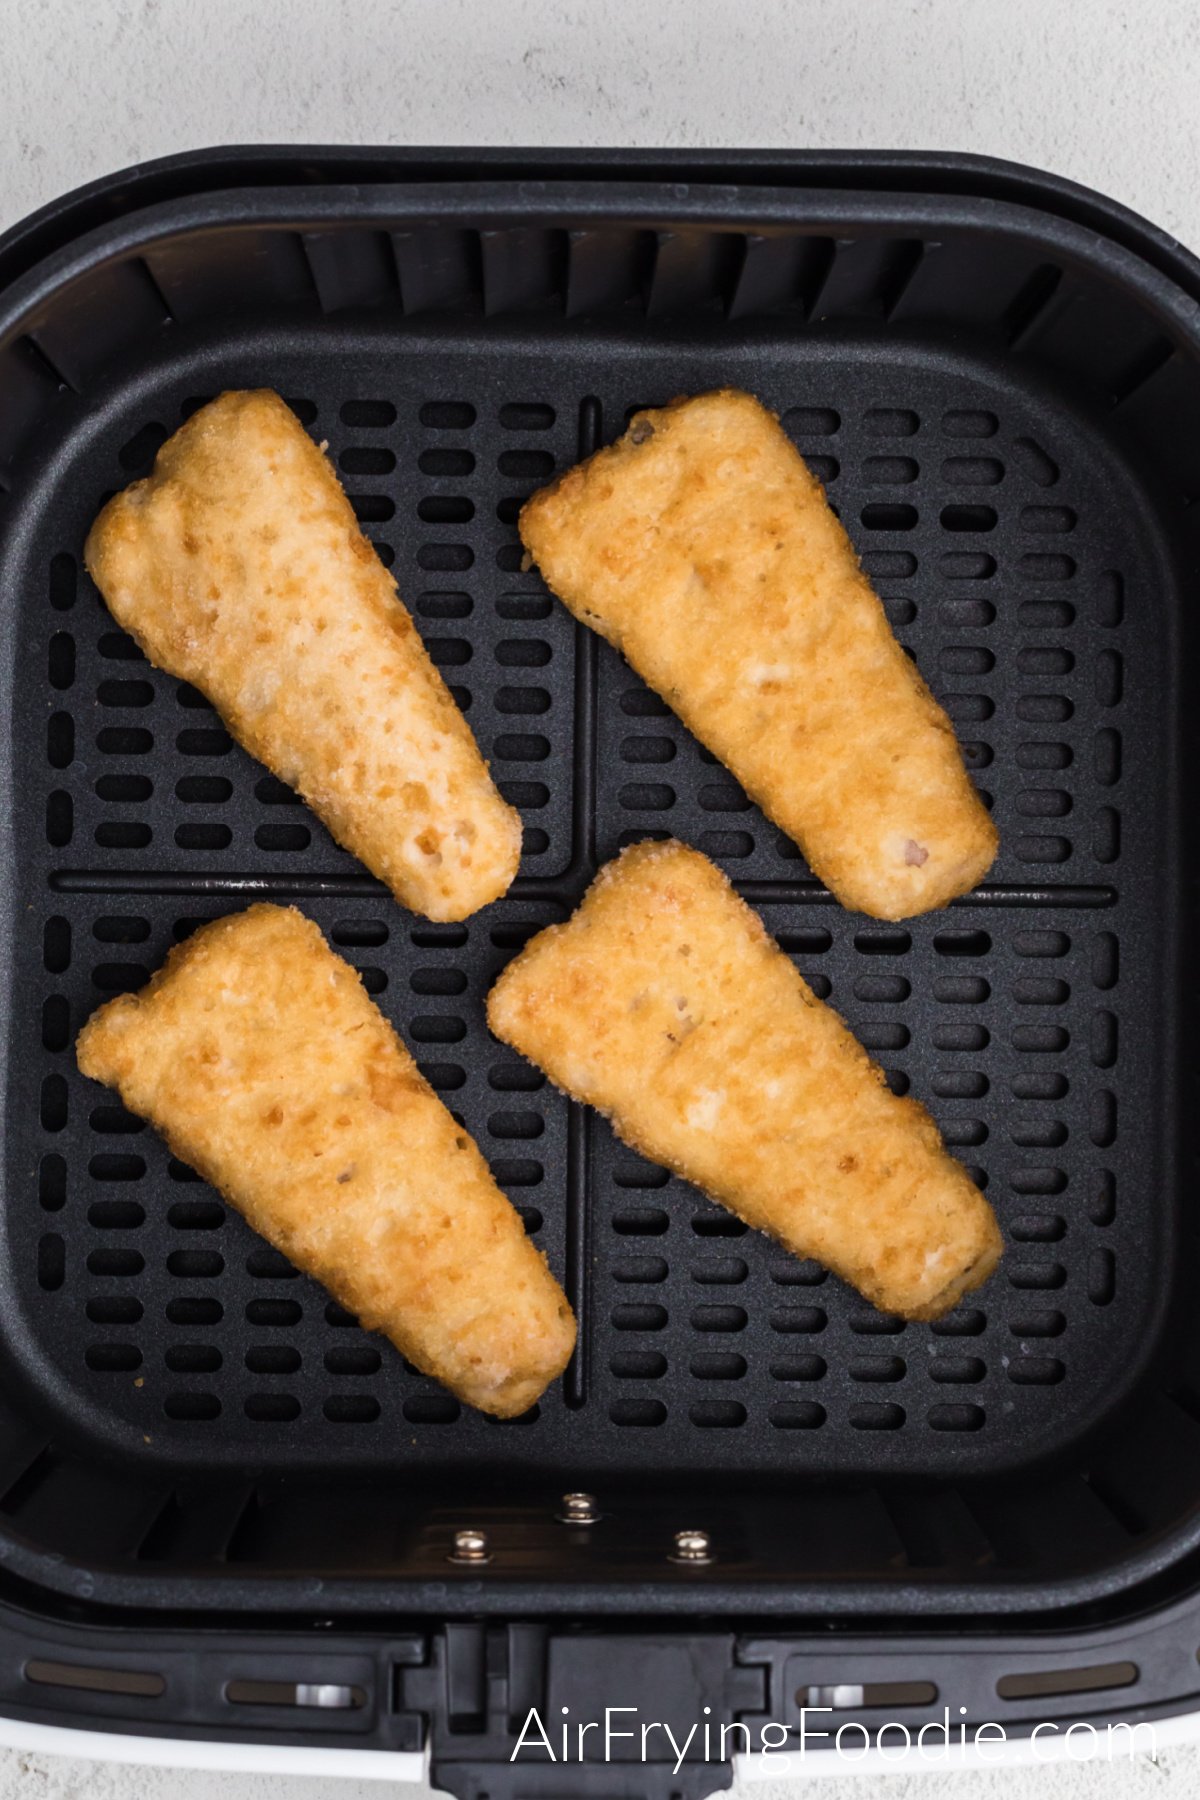 Frozen fish fillets in air fryer basket, ready to cook.